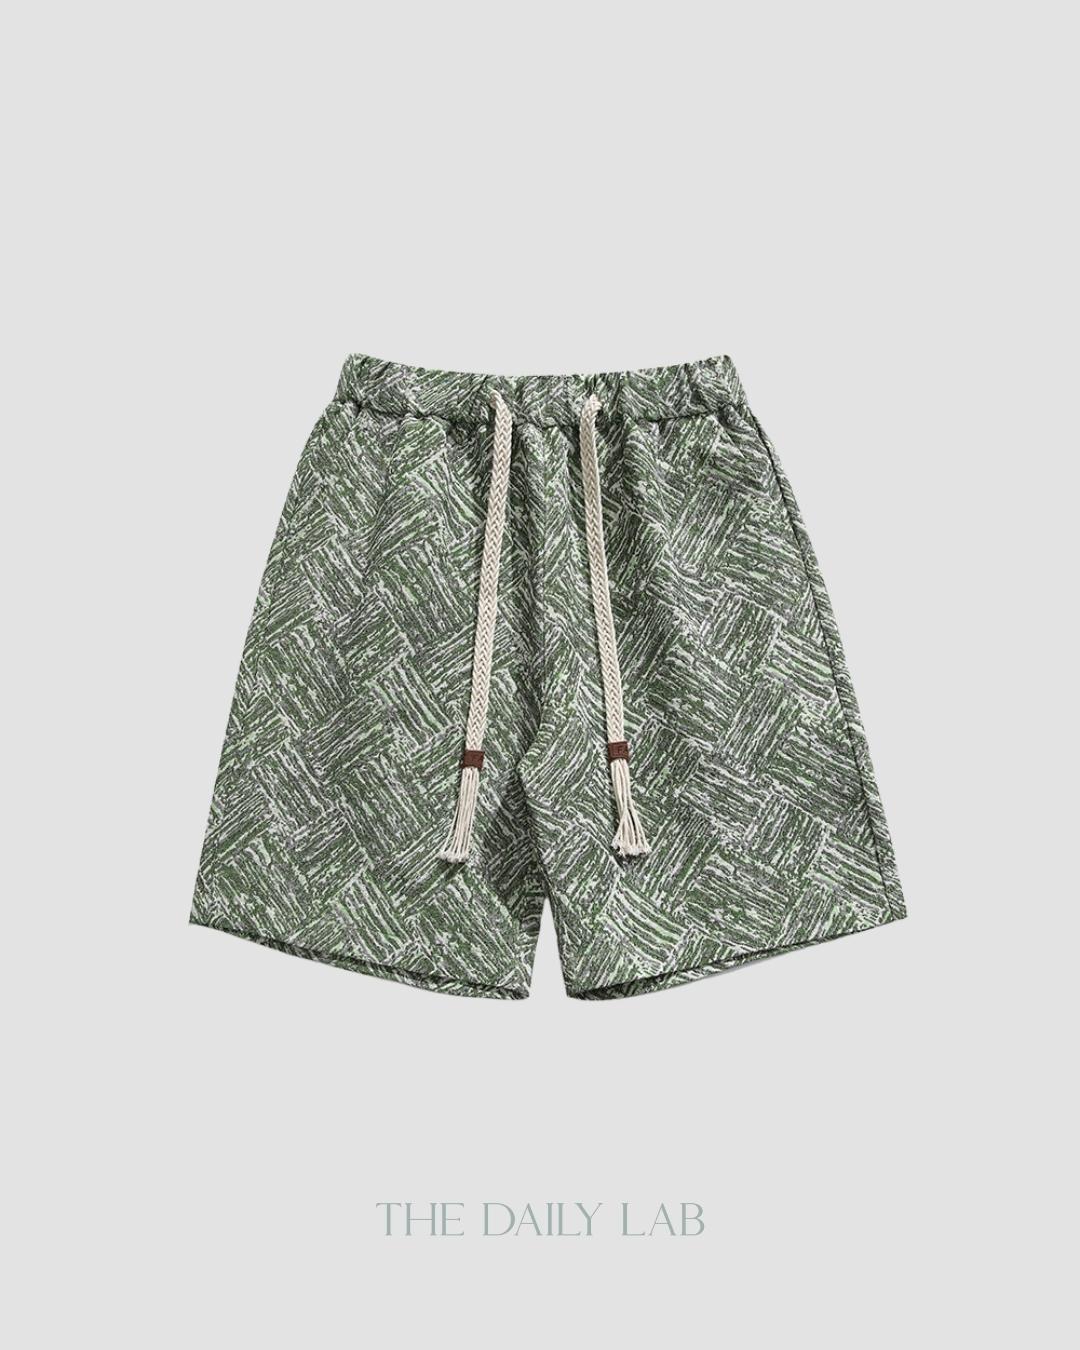 Retro Casual Staight Shorts in Green